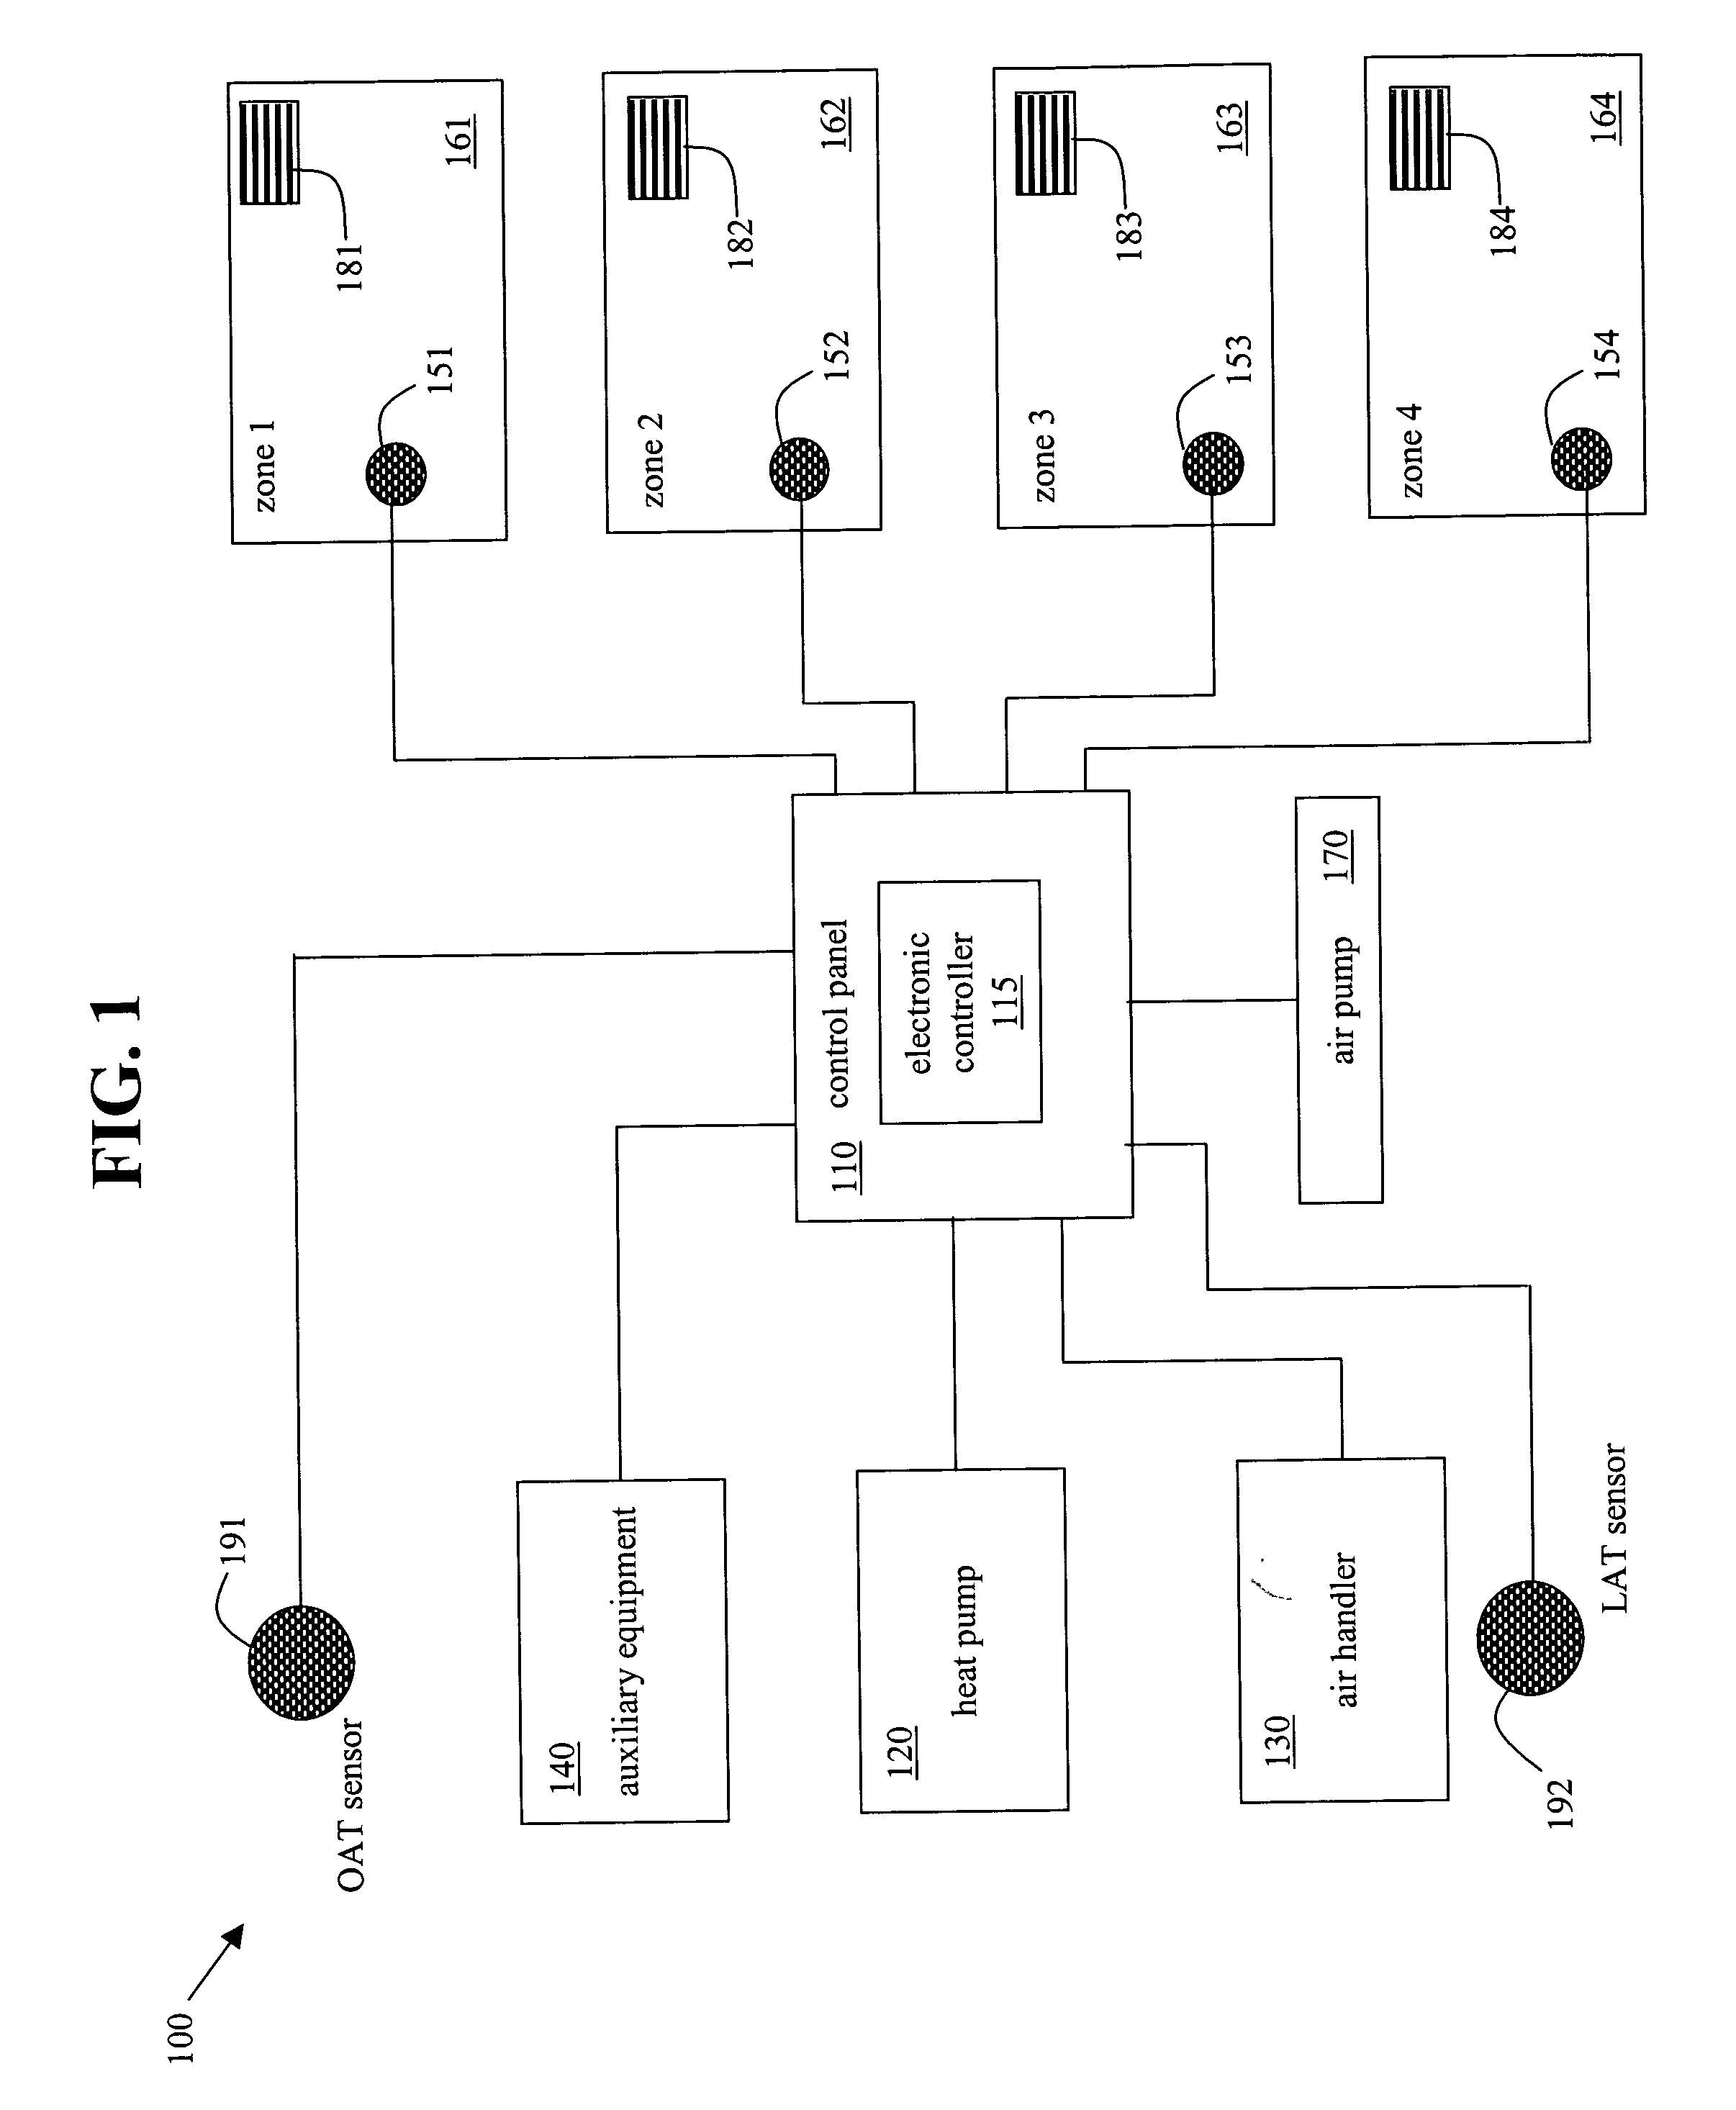 System and method for heat pump oriented zone control